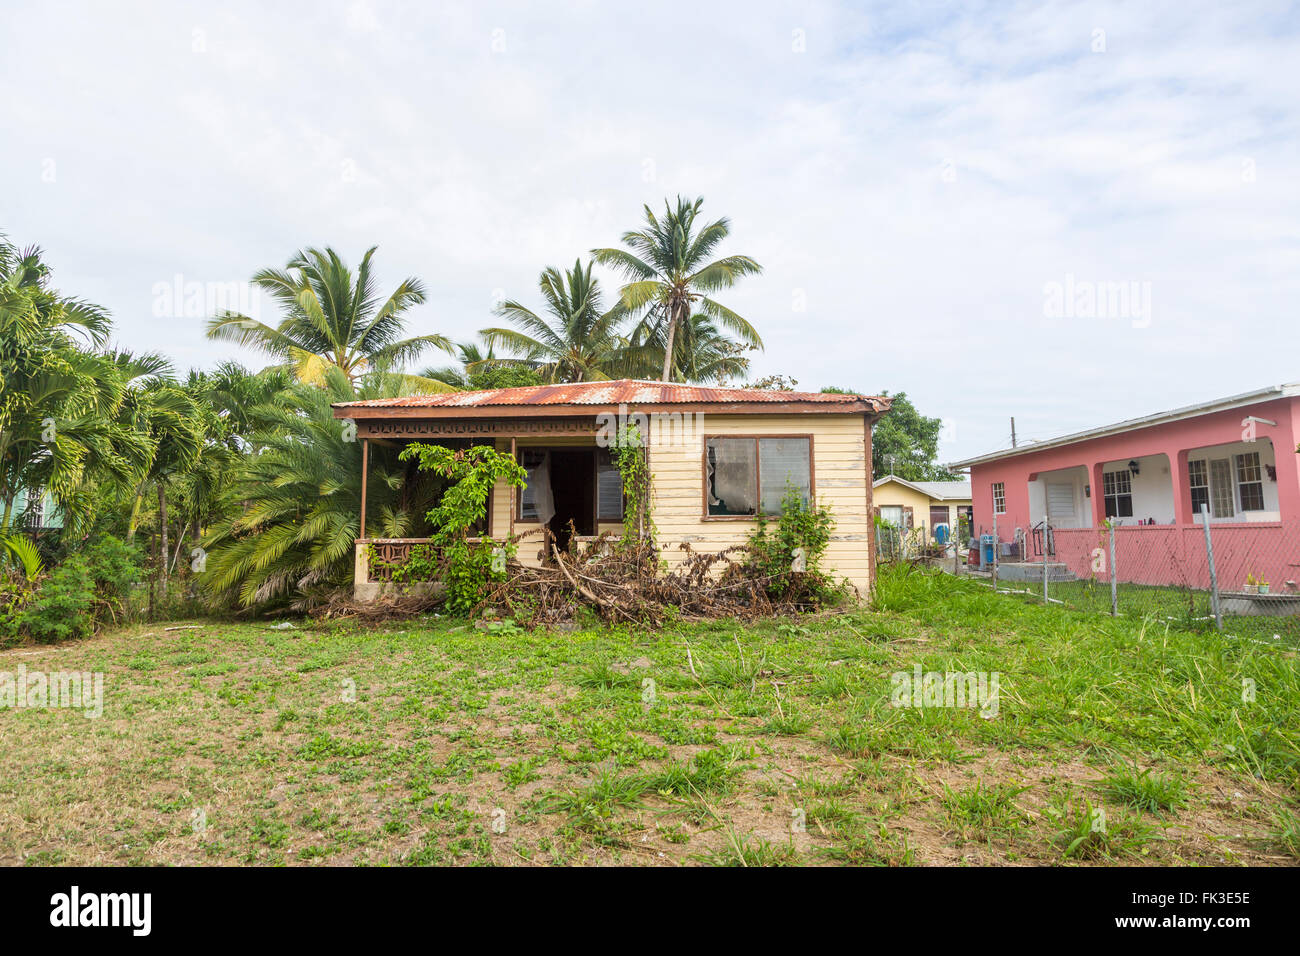 Typical run-down, dilapidated wooden single storey house in Liberta, south Antigua, Antigua and Barbuda, West Indies Stock Photo